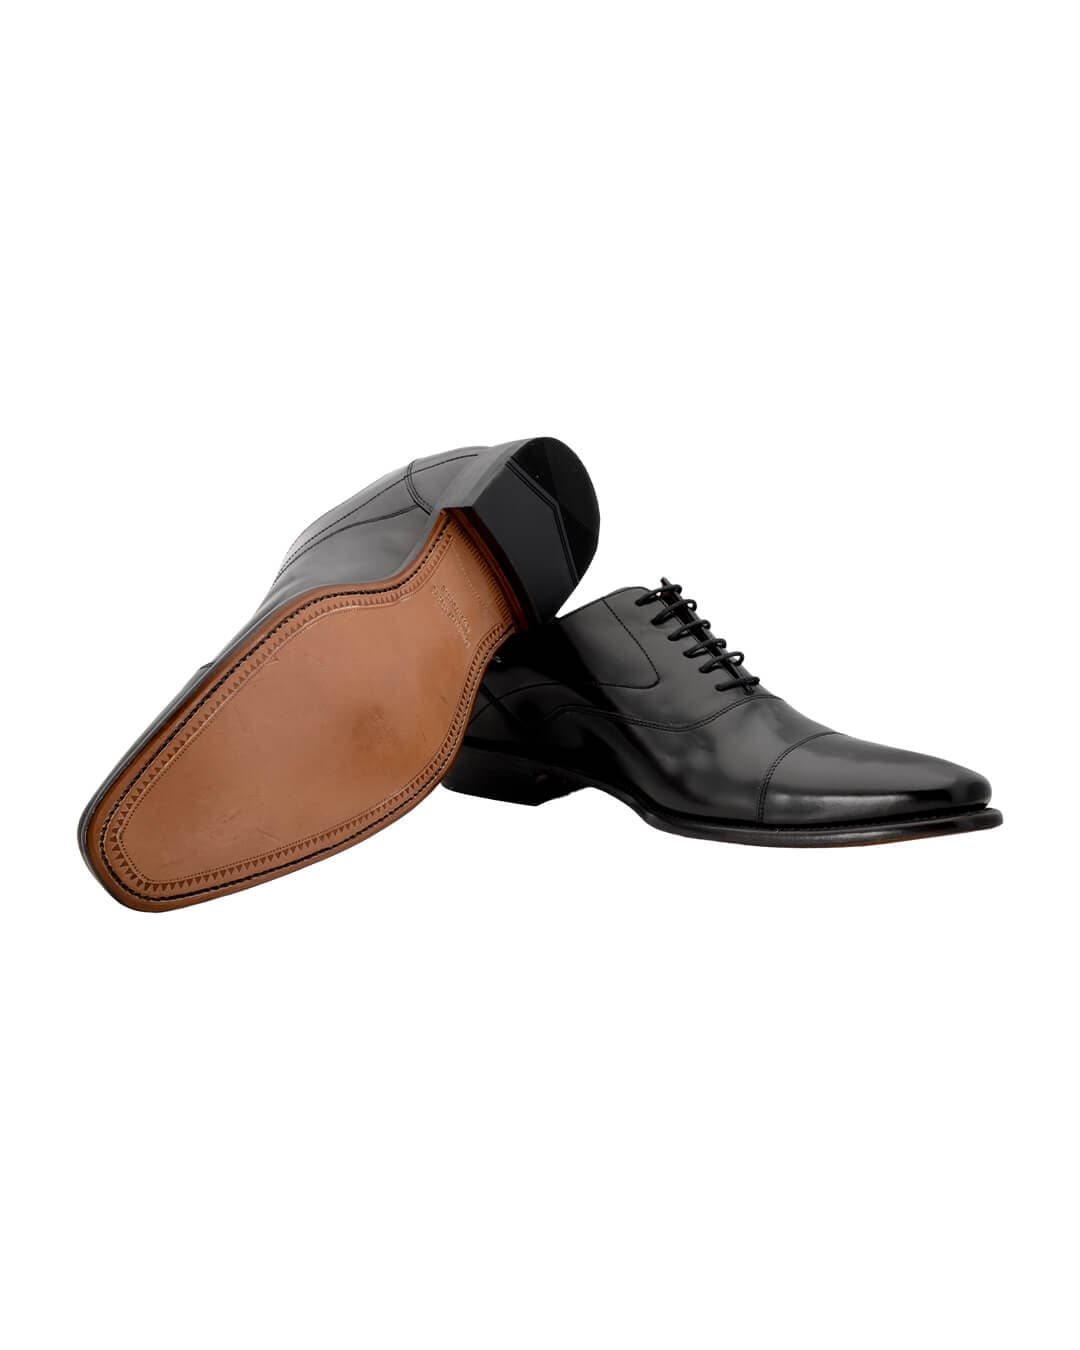 Gagliardi Shoes Gagliardi Black Polished Leather Shoes with Goodyear Welted Soles